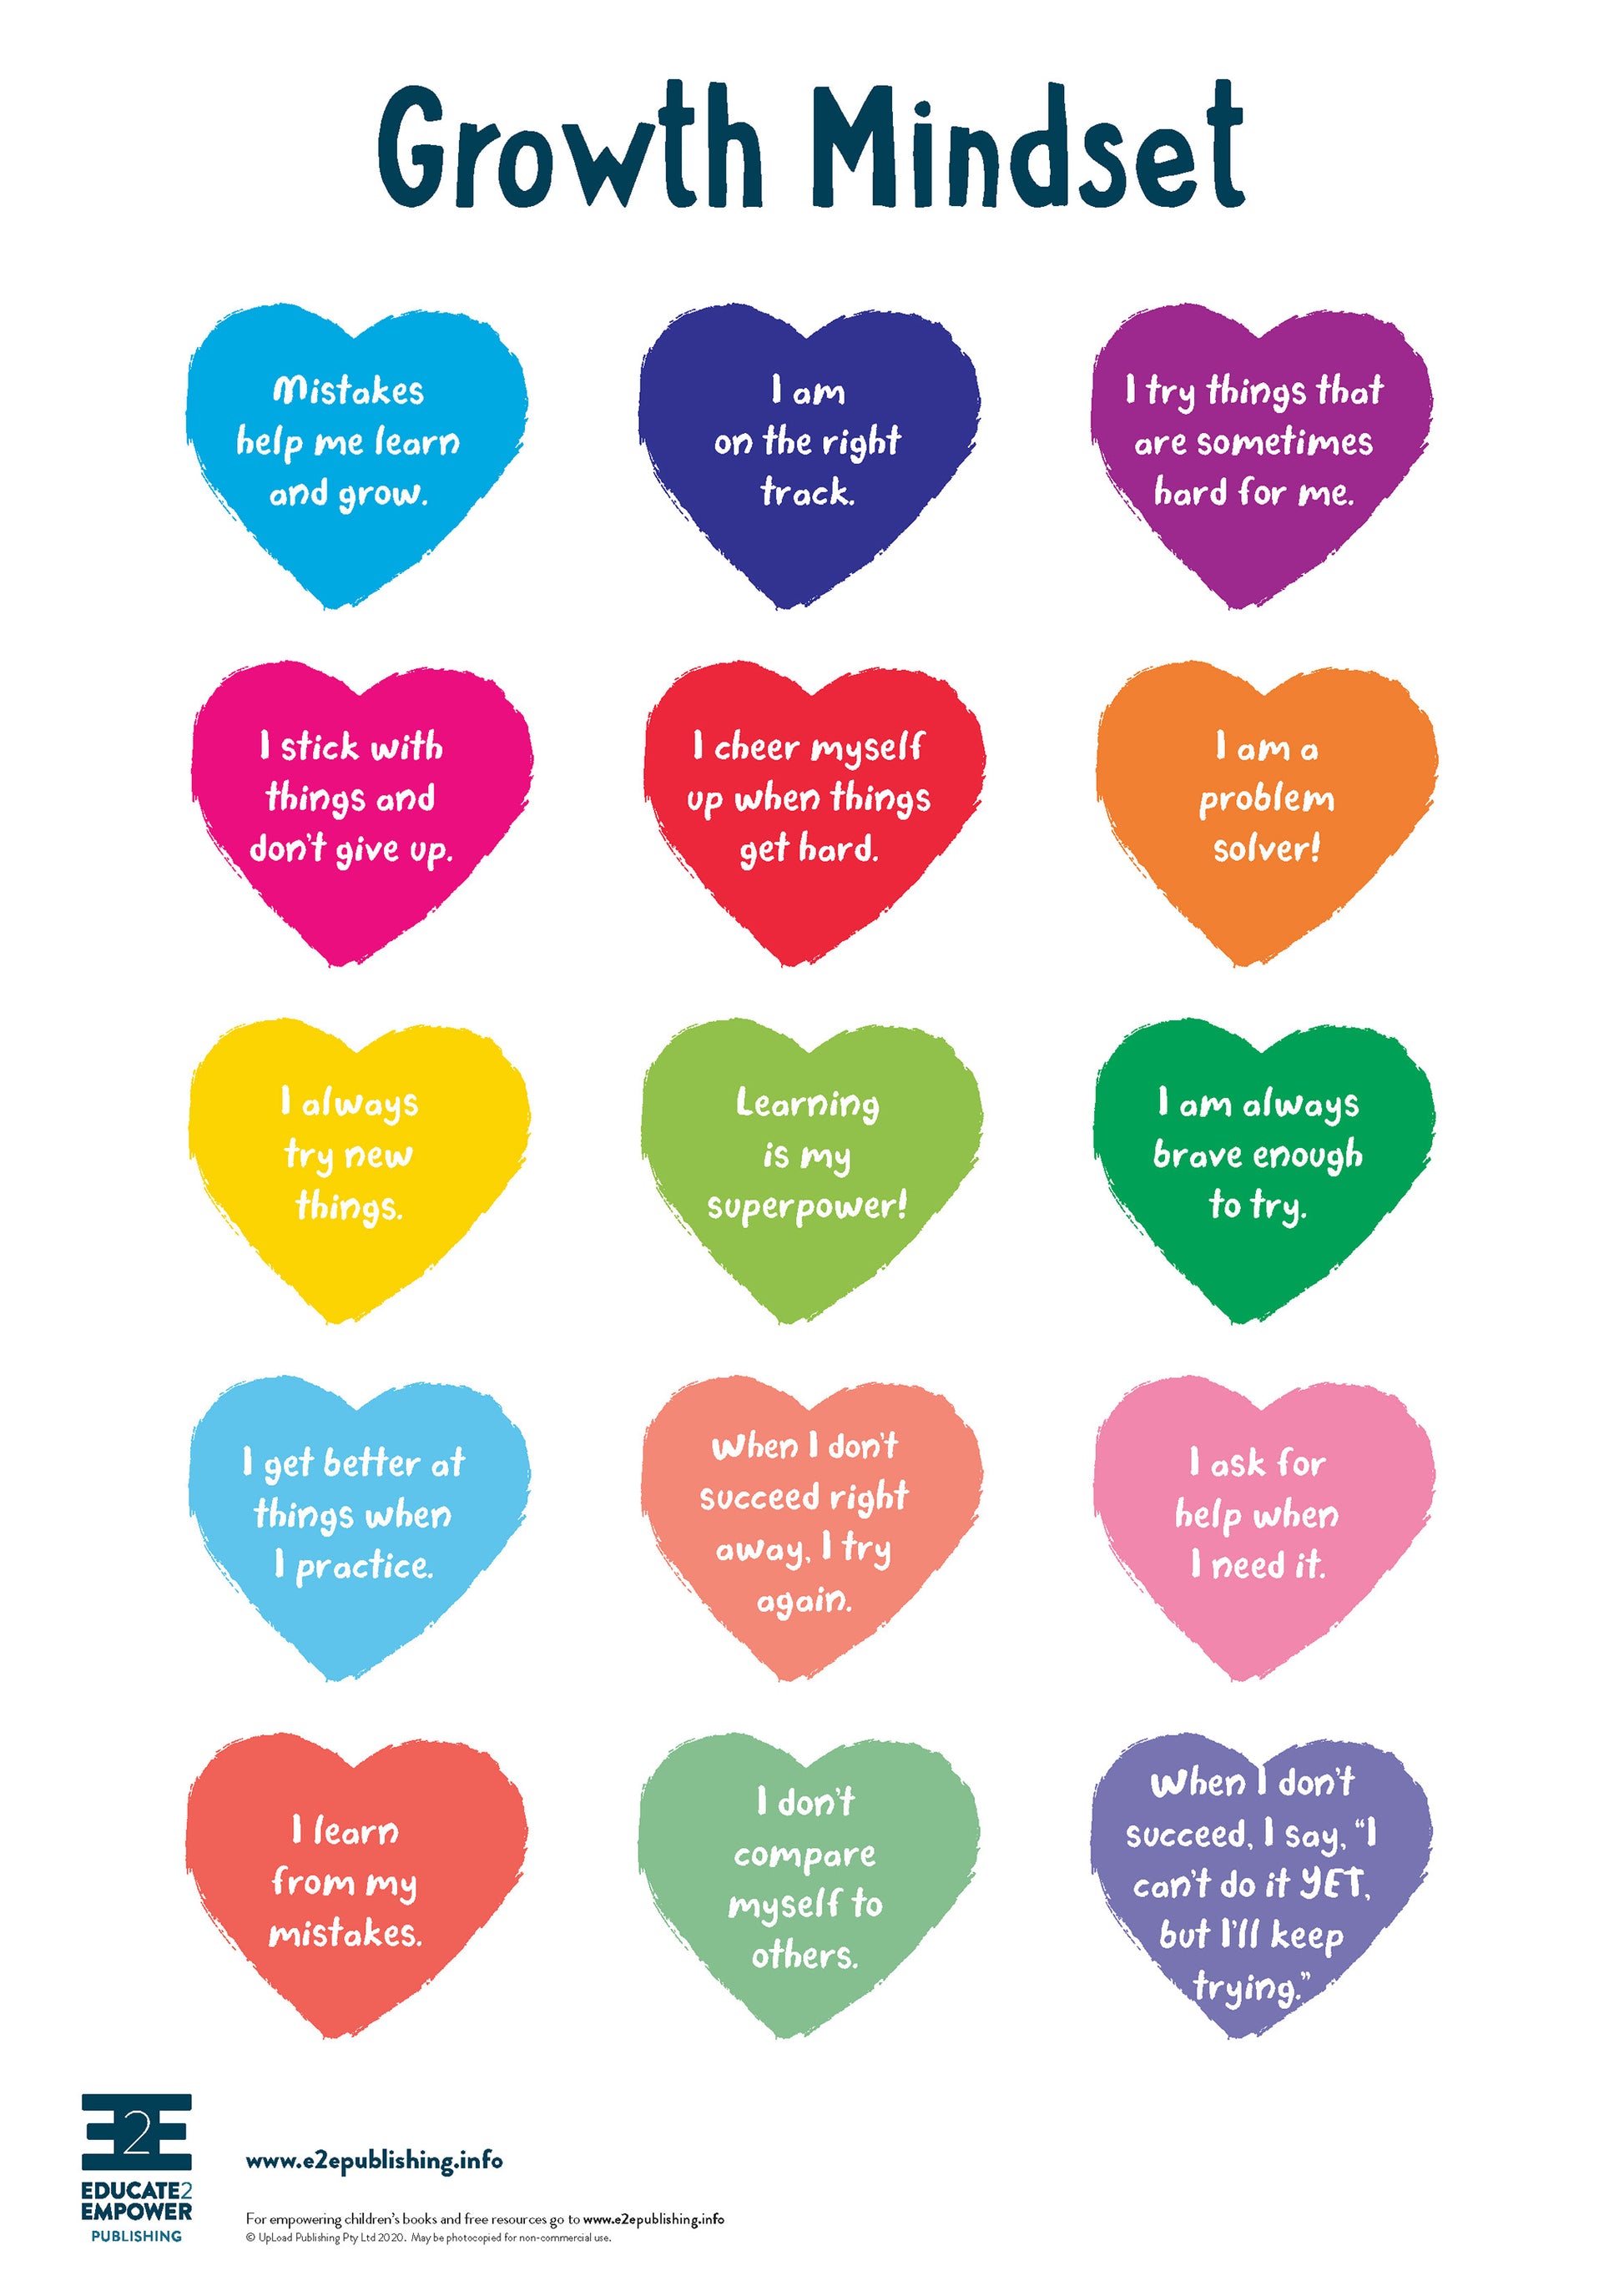 A children's activity sheet with 15 heart shapes, each containing a positive affirmation.